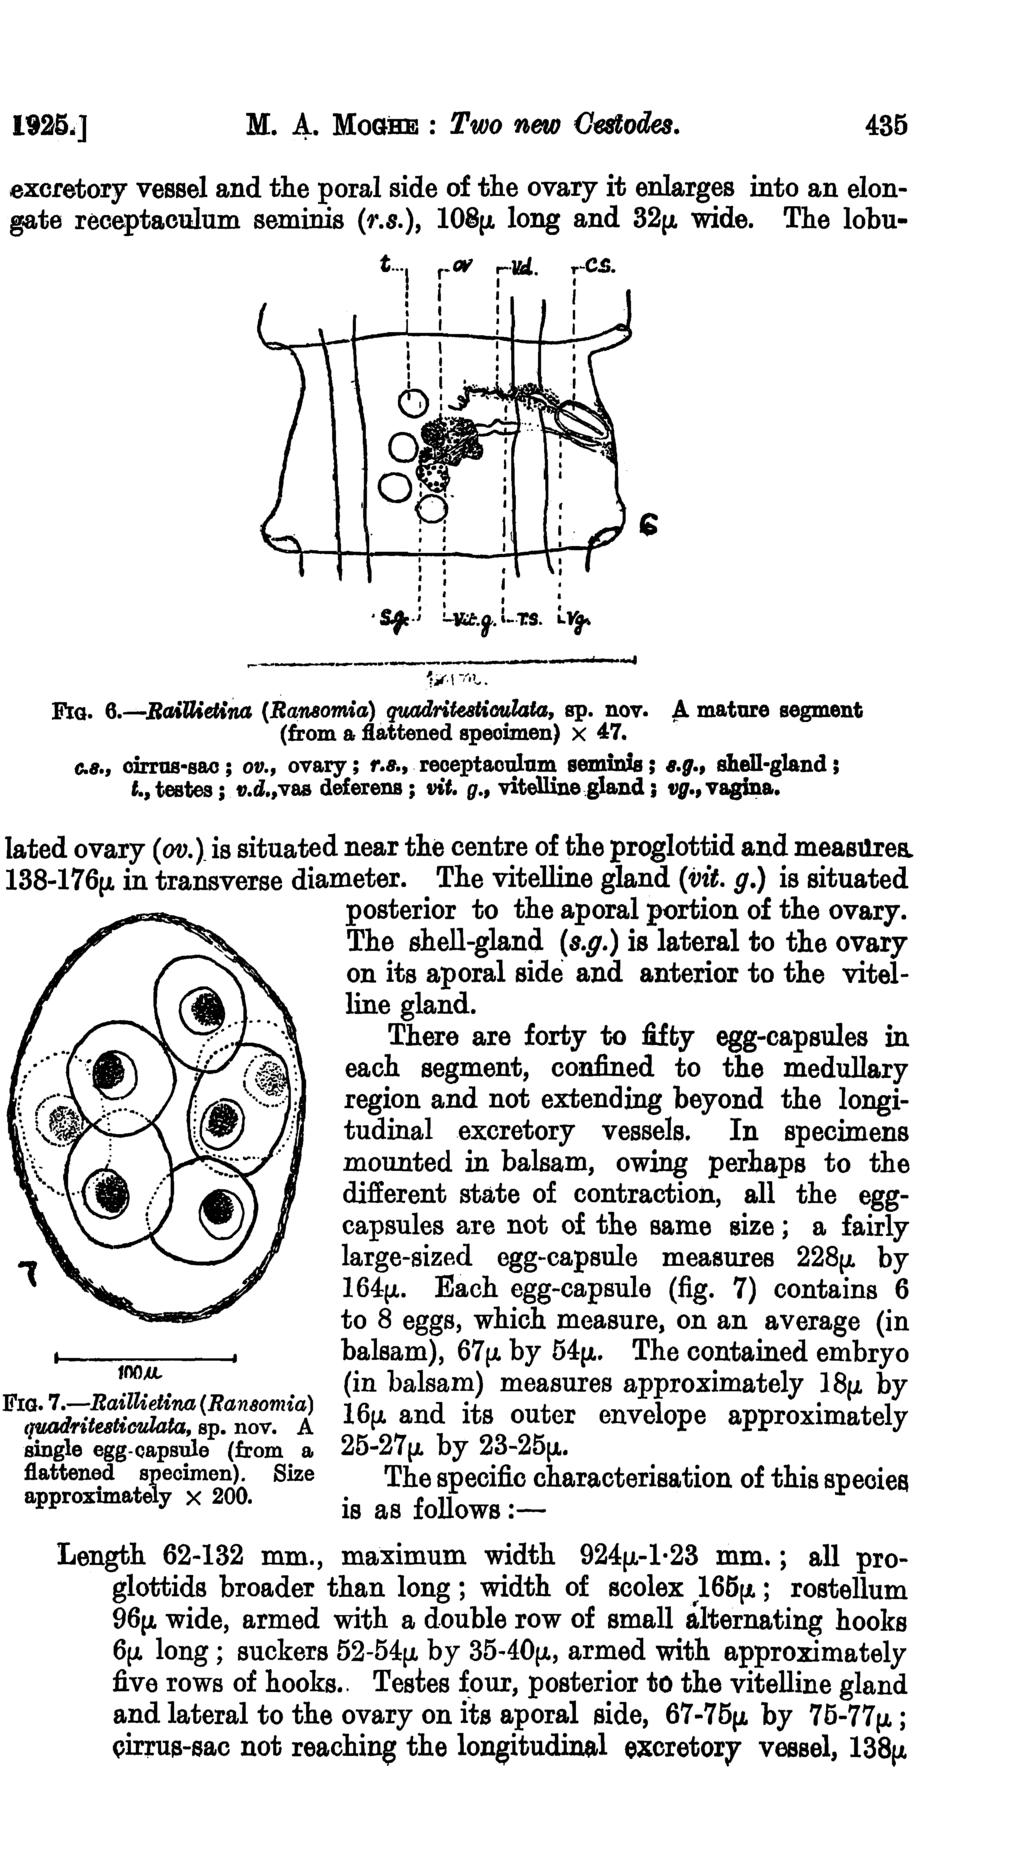 1925.] M. 4.. MOGHE : Two new Oe8toaea. 435 excretory vessel and the poral side of the ovary it enlarges into an elongate receptaculum sammis ('}'.8.), 10S(L long and 32(L wide. The lobut '1 r N,...1rt.